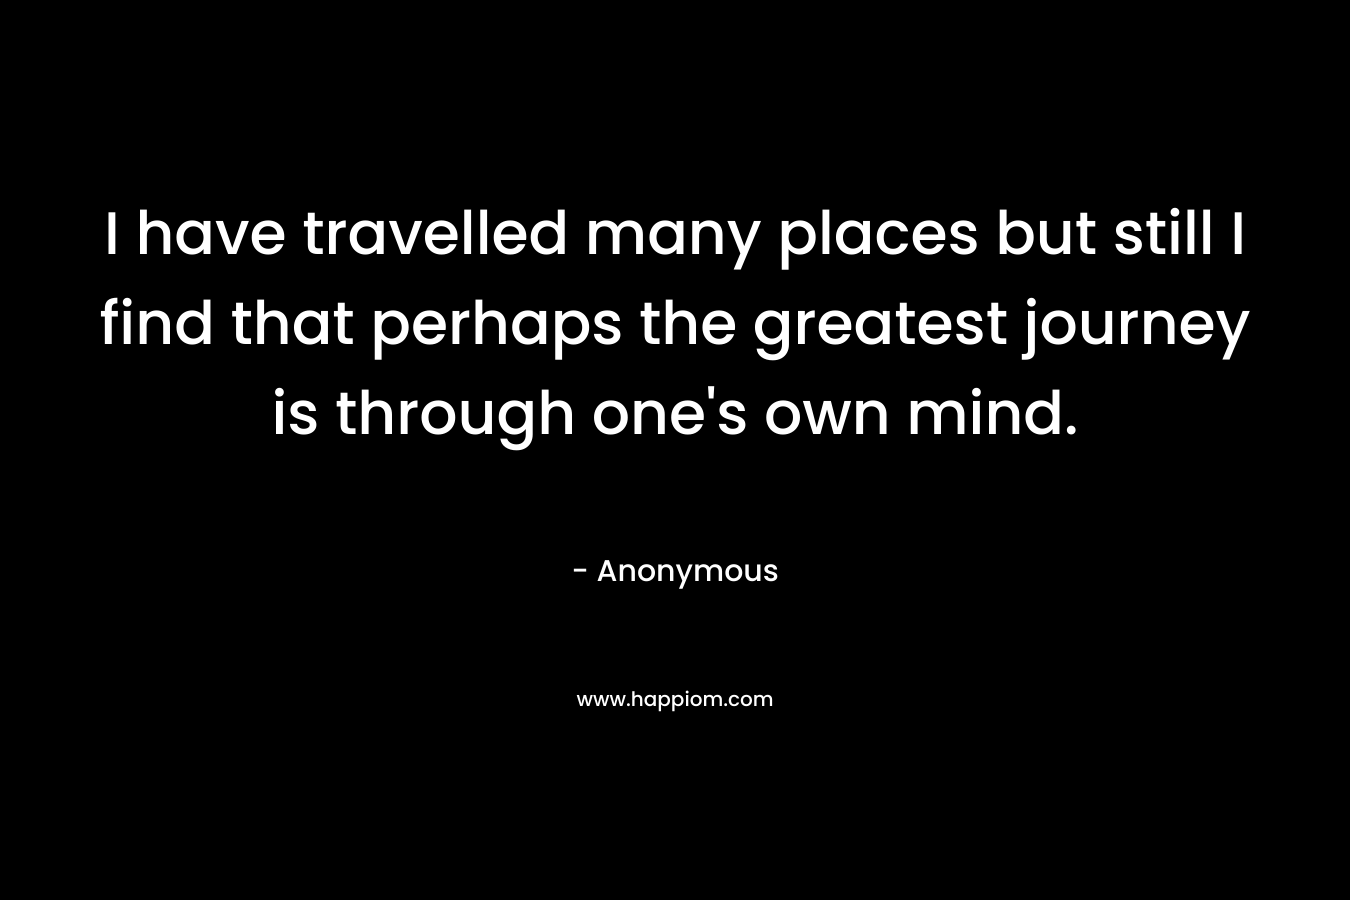 I have travelled many places but still I find that perhaps the greatest journey is through one's own mind.